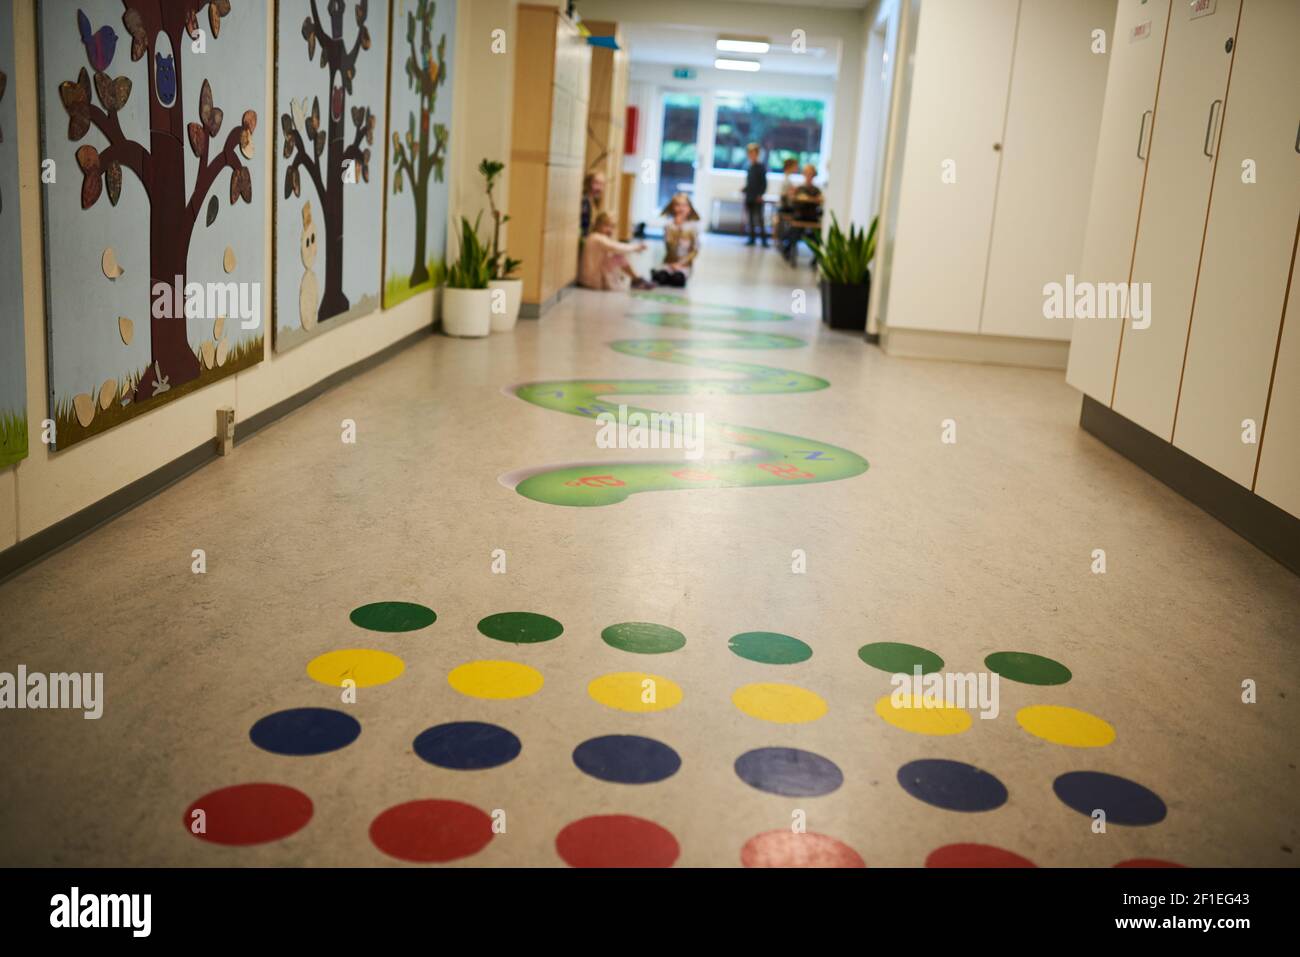 Colorful game for kids on the floor in school hallway Stock Photo